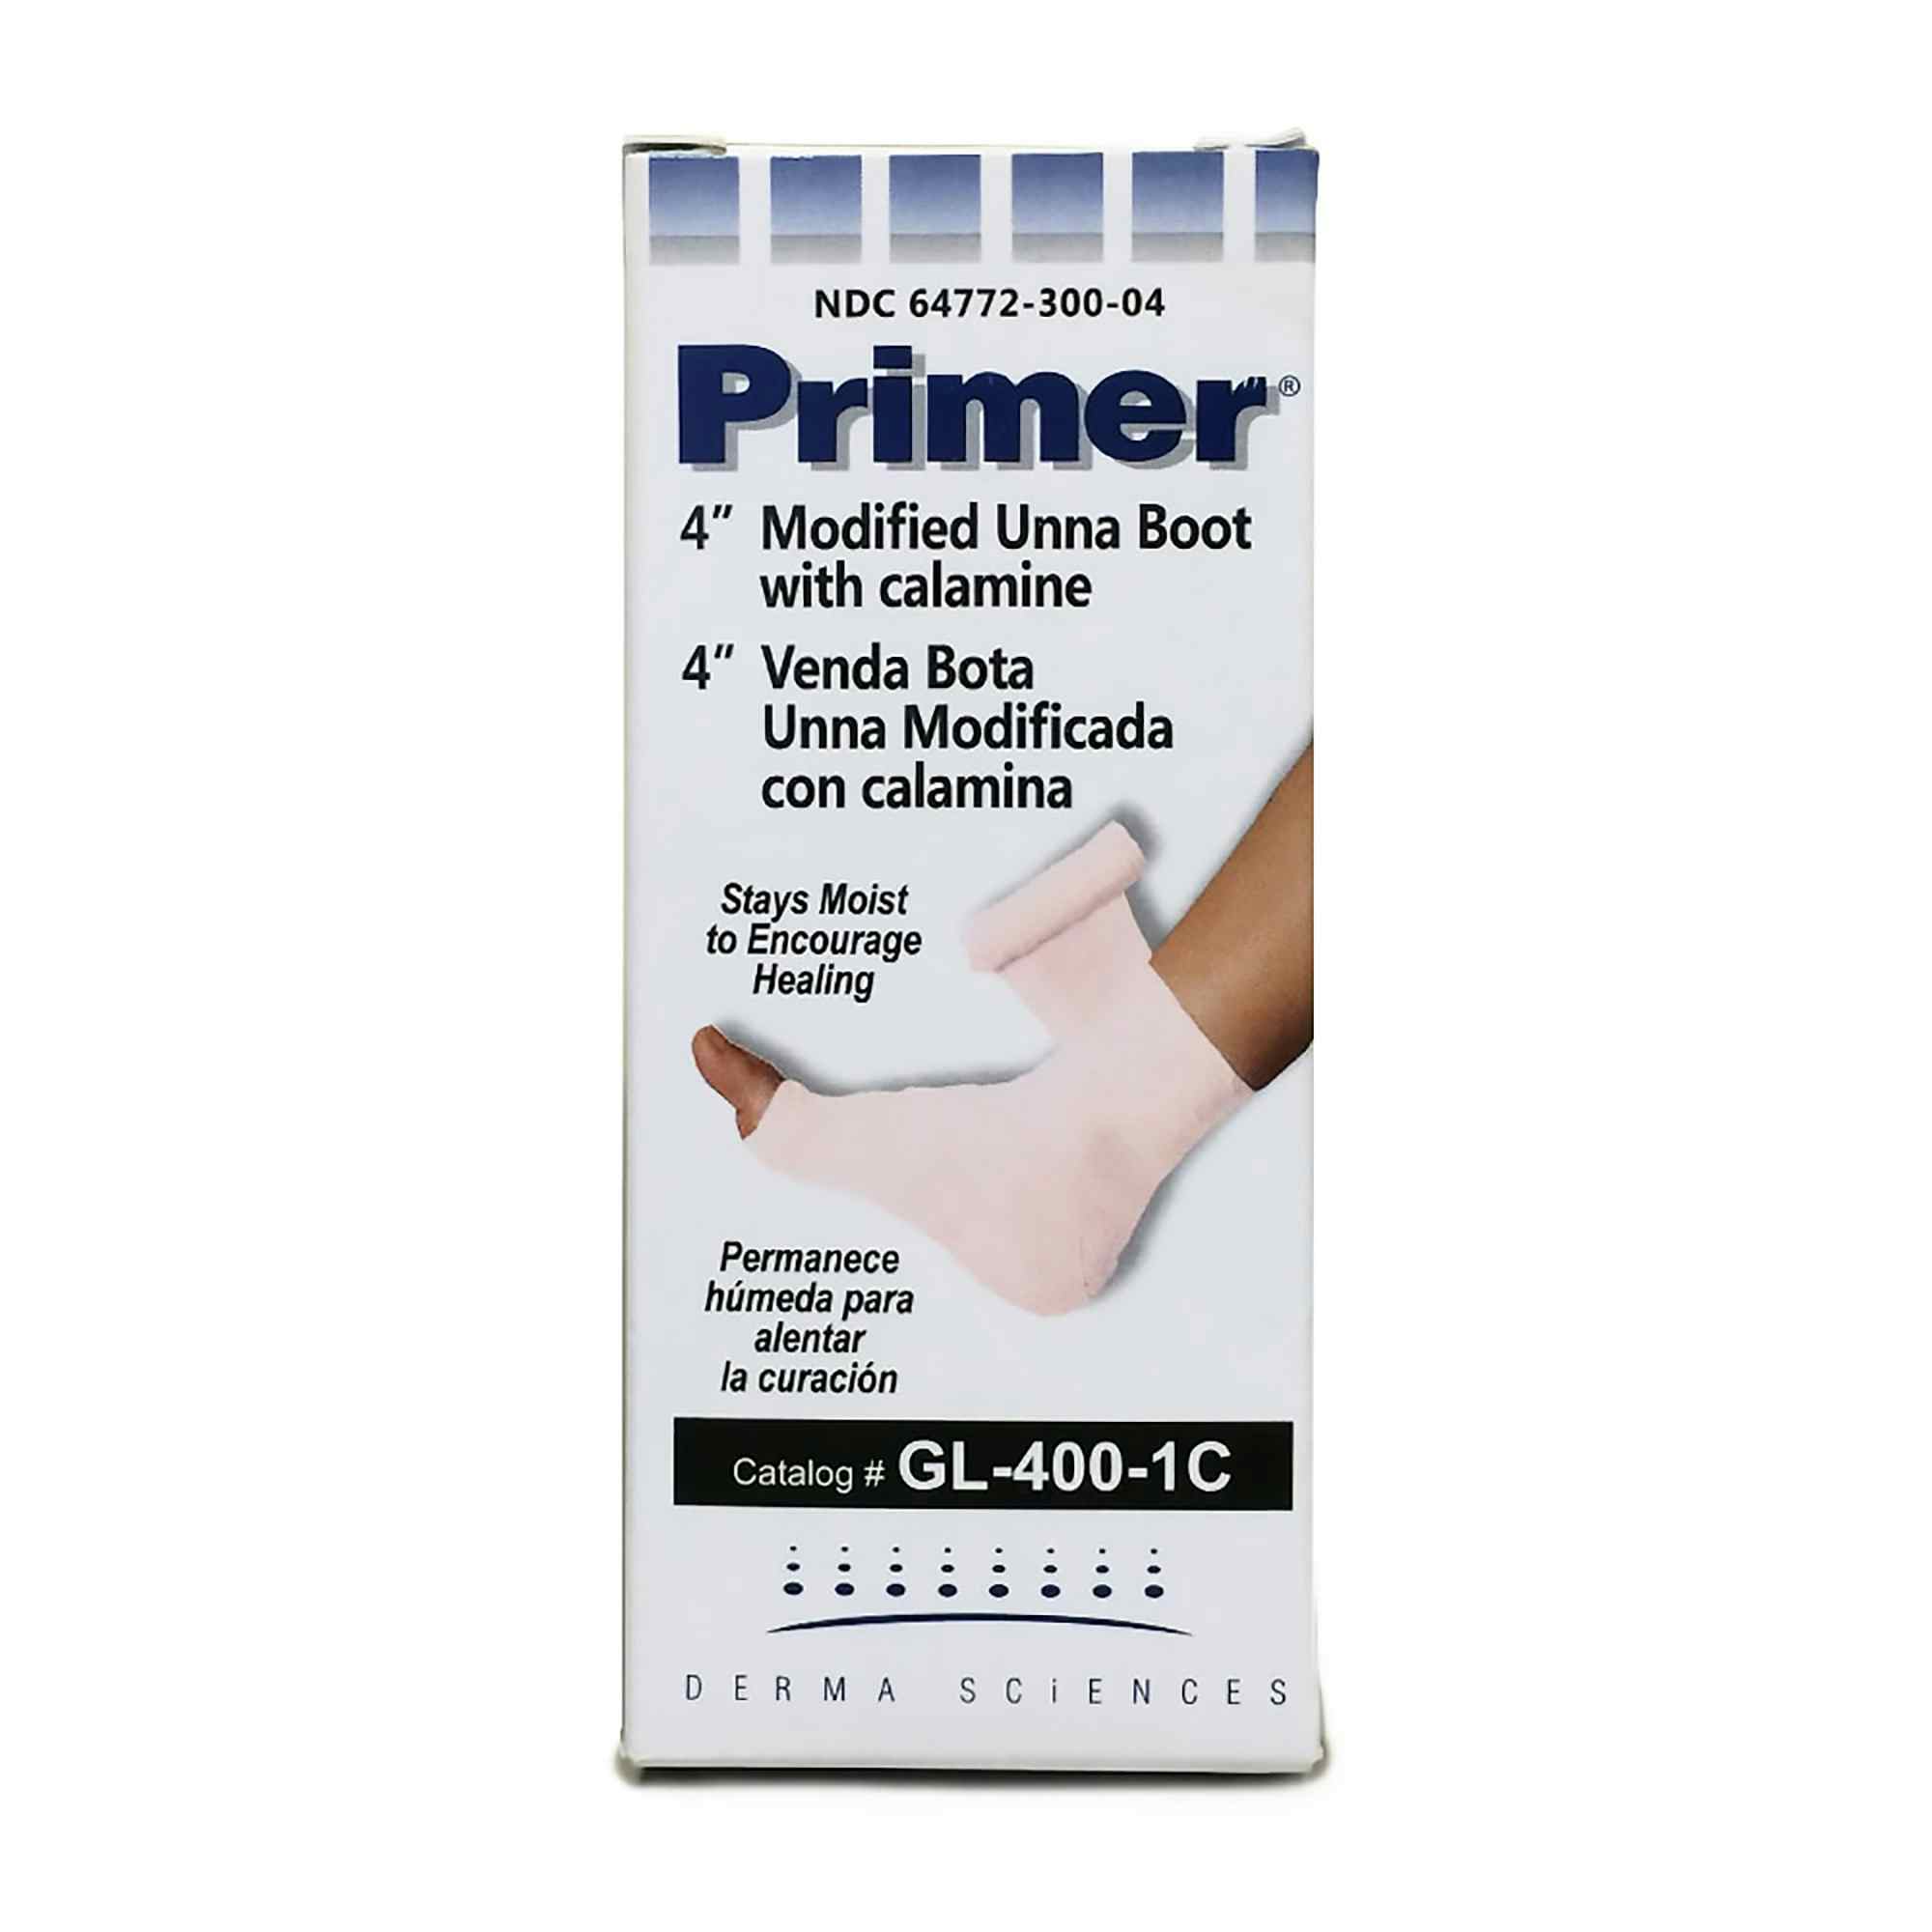 Primer 4" Modified Unna Boot with Calamine